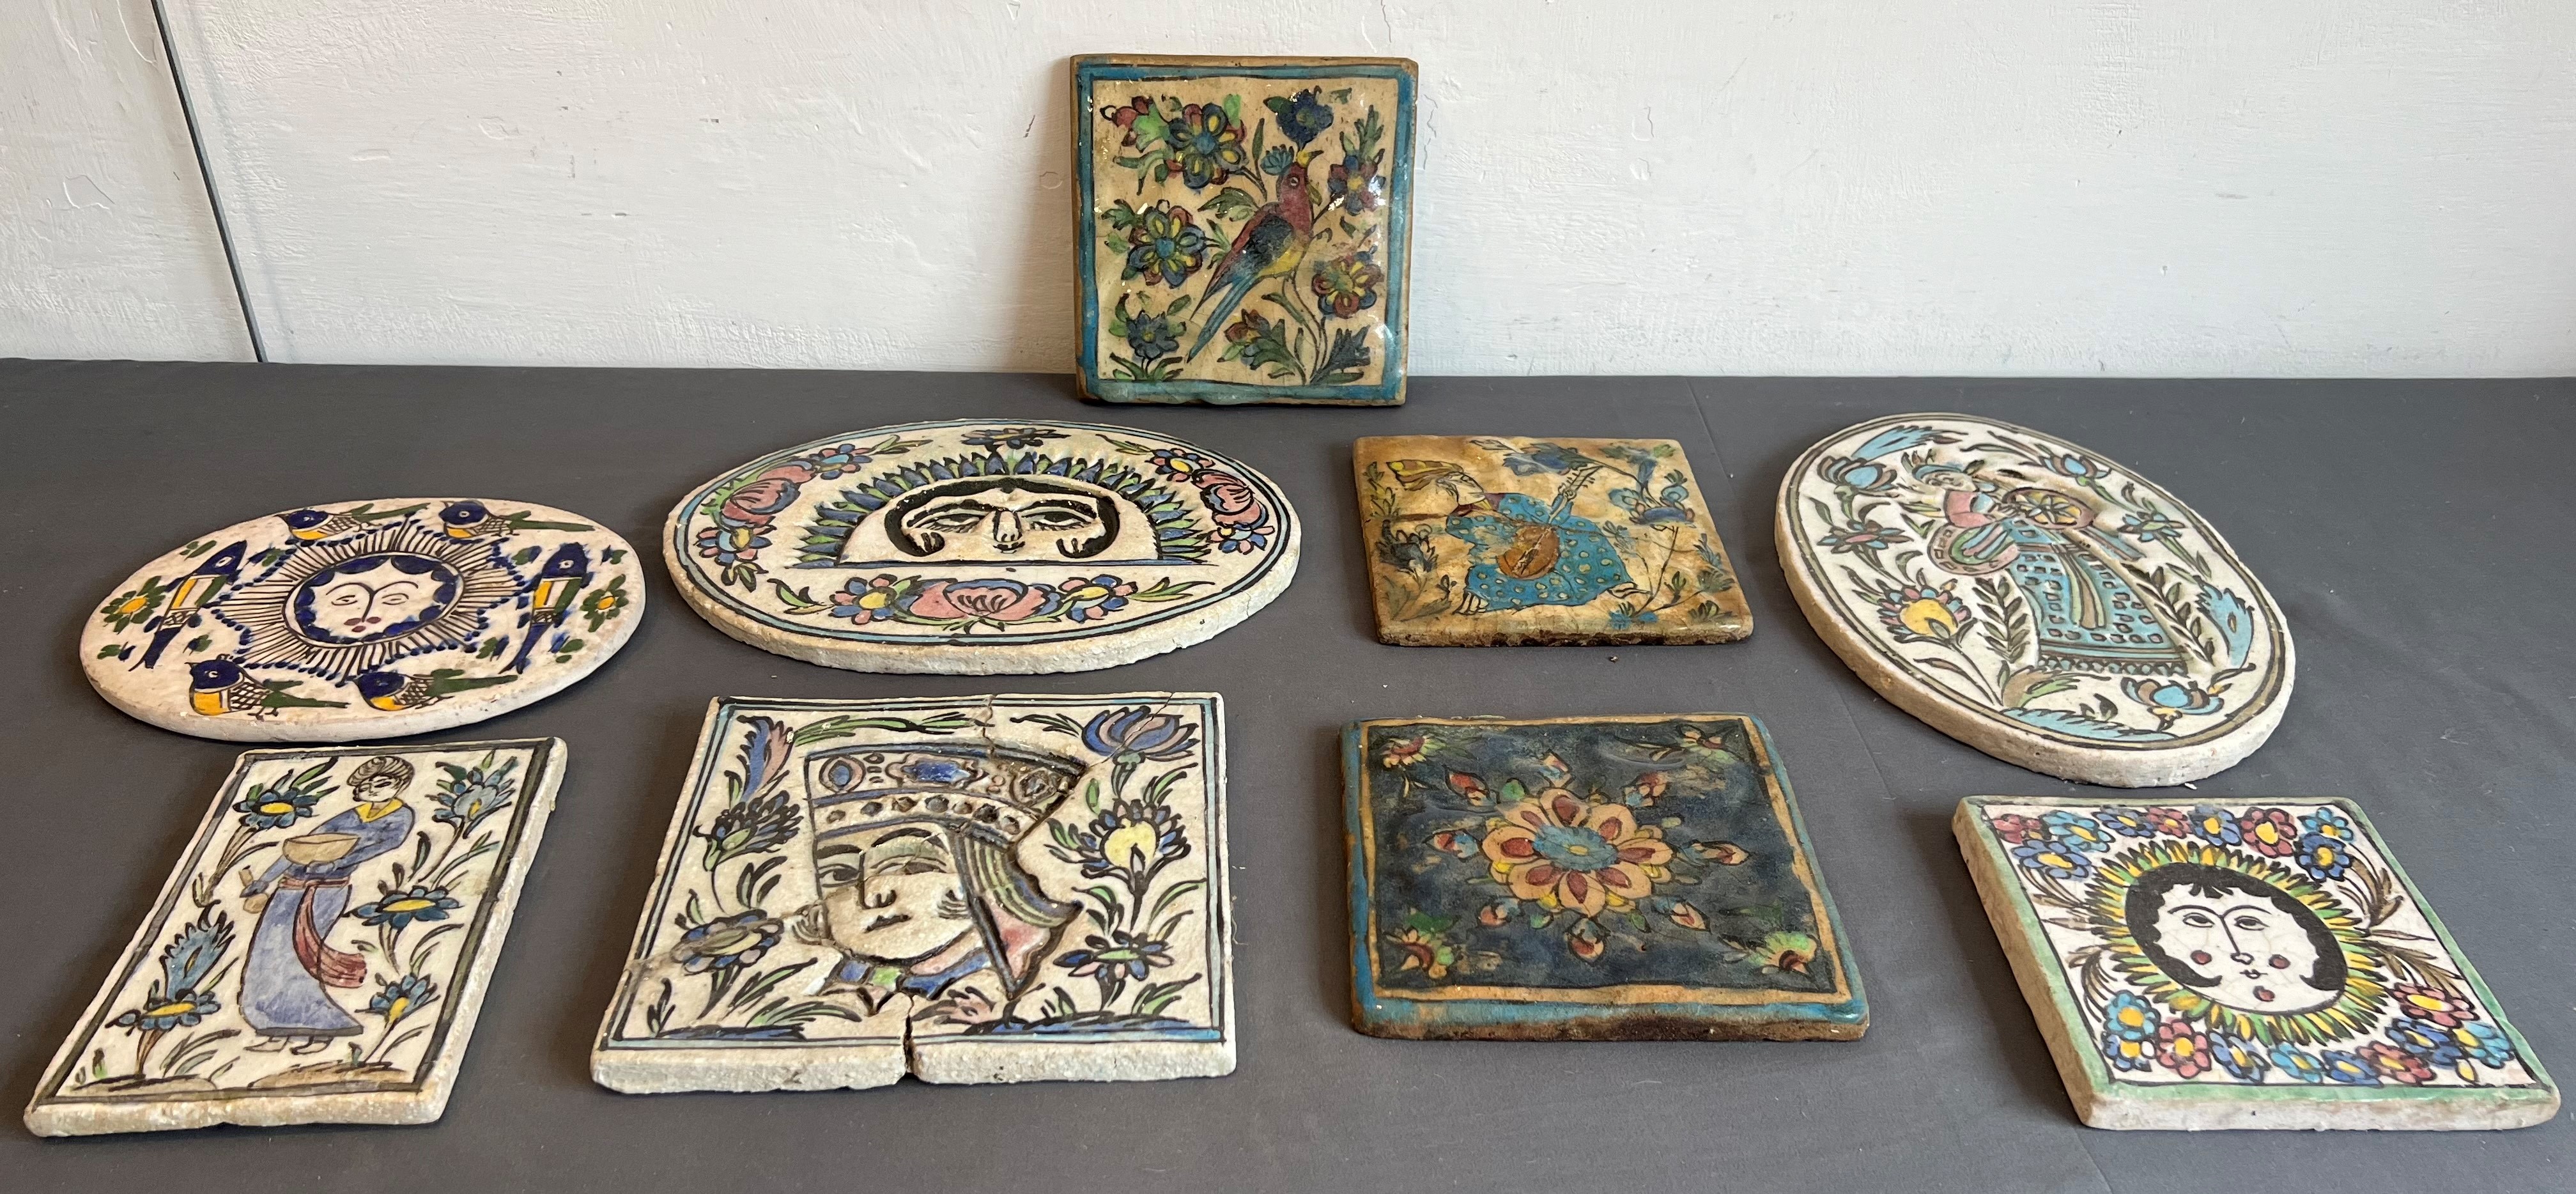 A collection of nine Persian glazed tiles - some antique, including three oval tiles, one 30 cm tile - Image 3 of 9